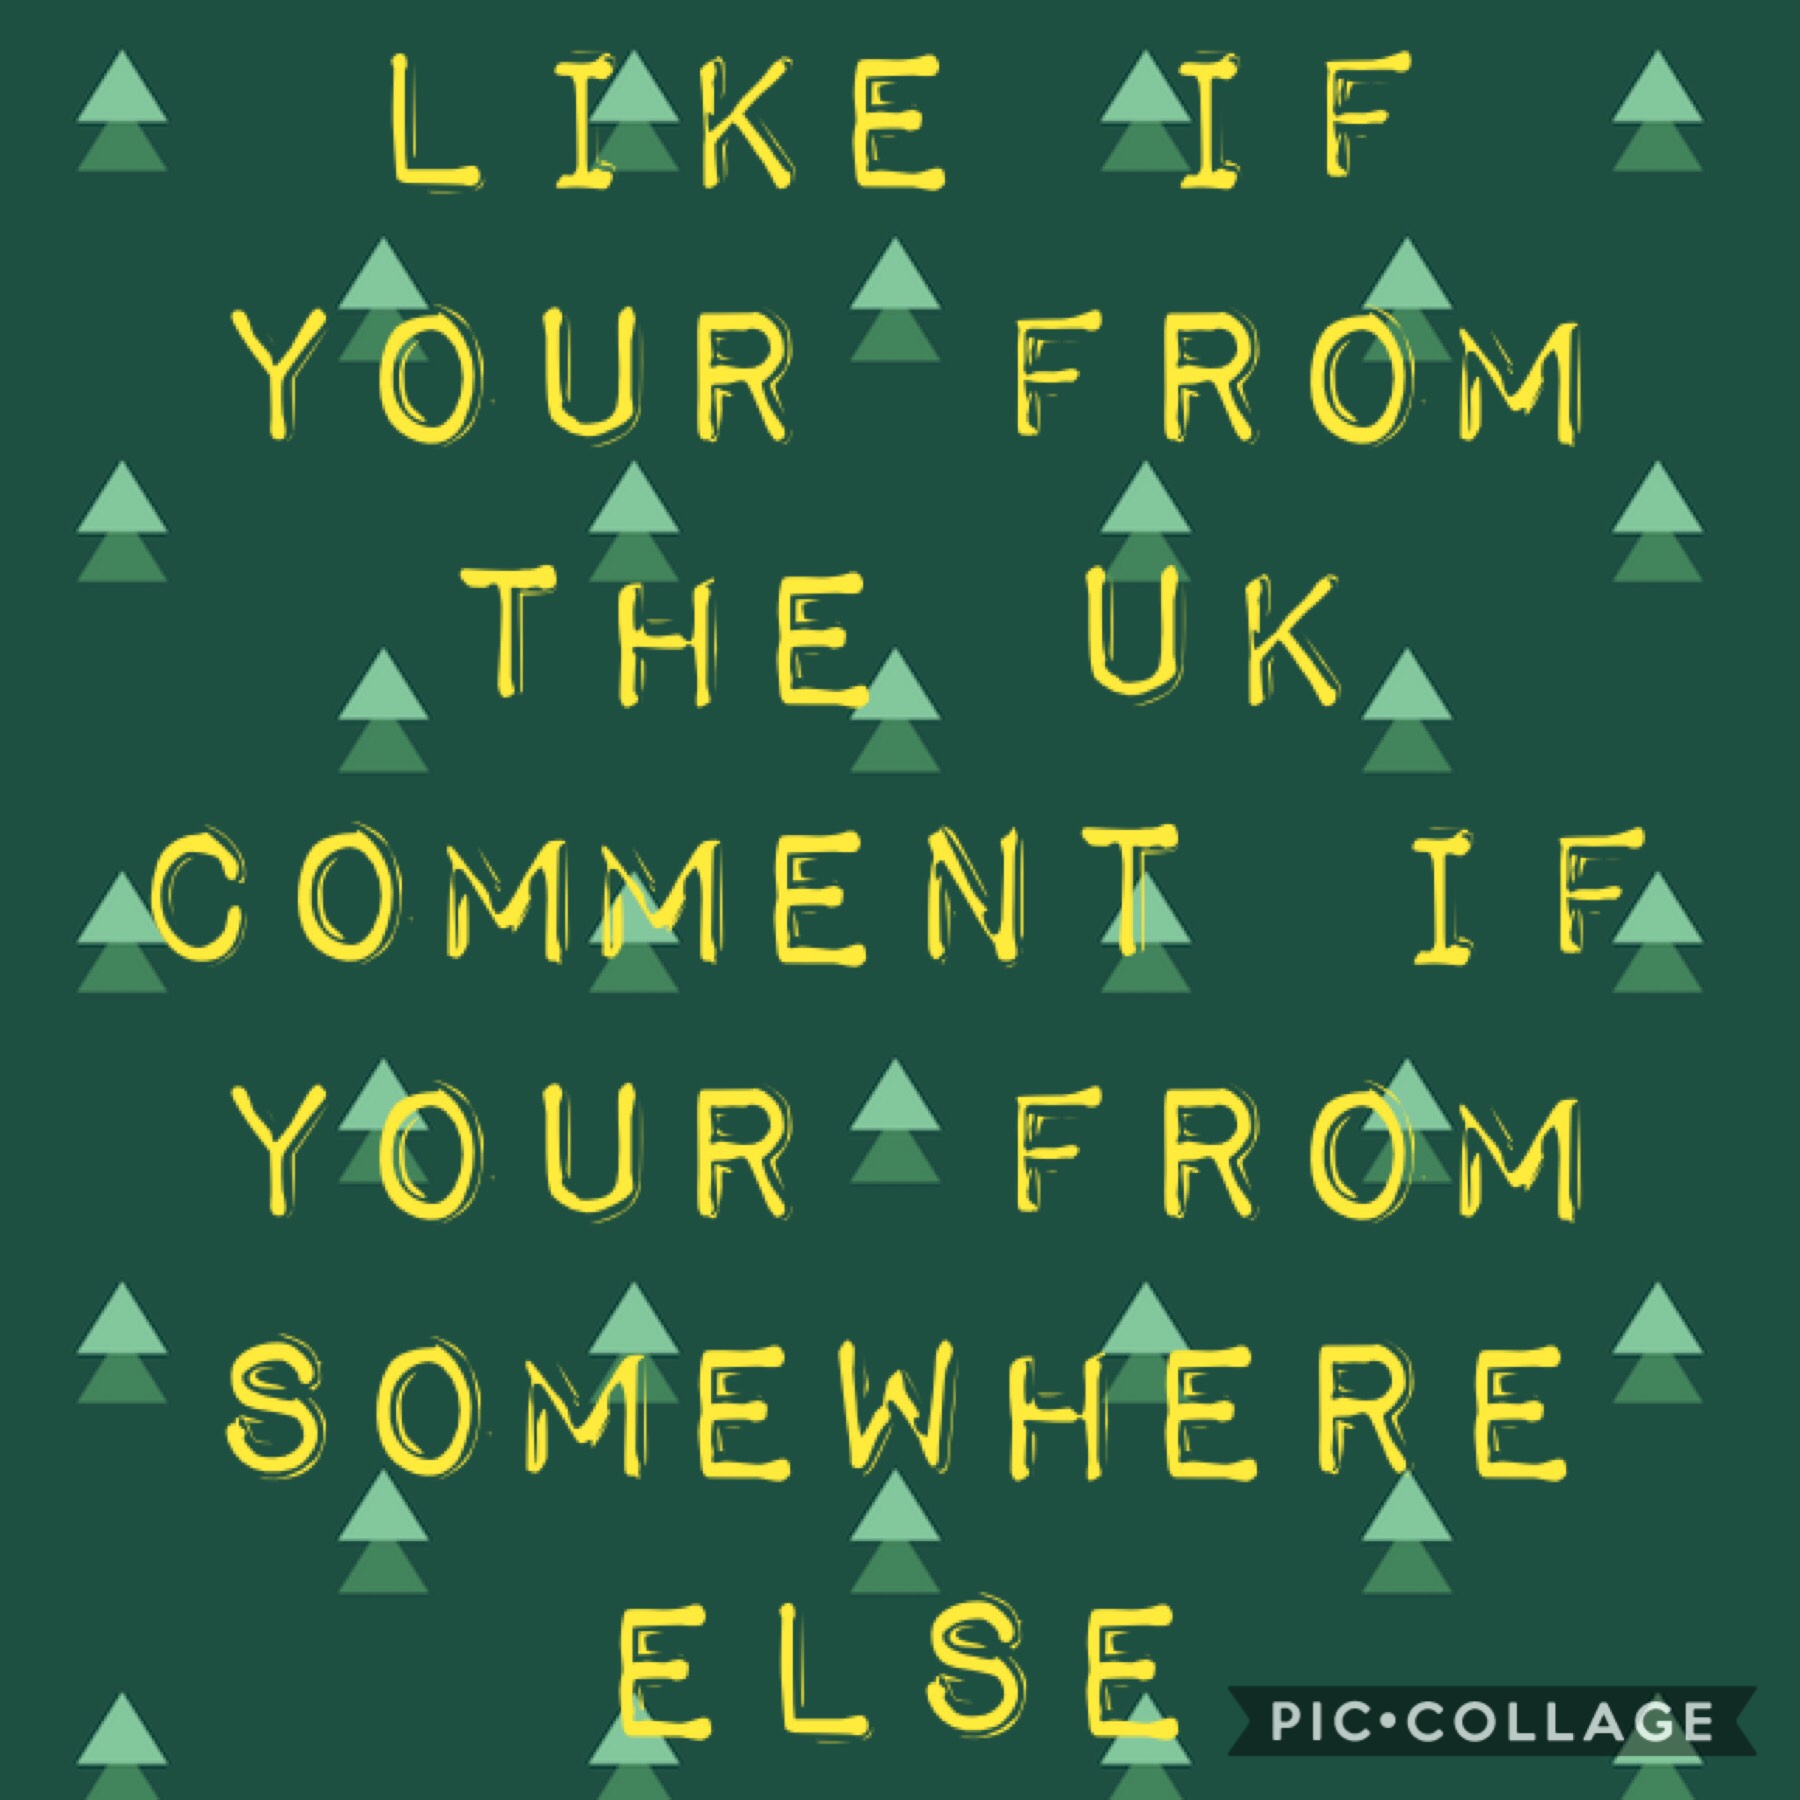 ❤️ I liked cause I’m from the uk❤️